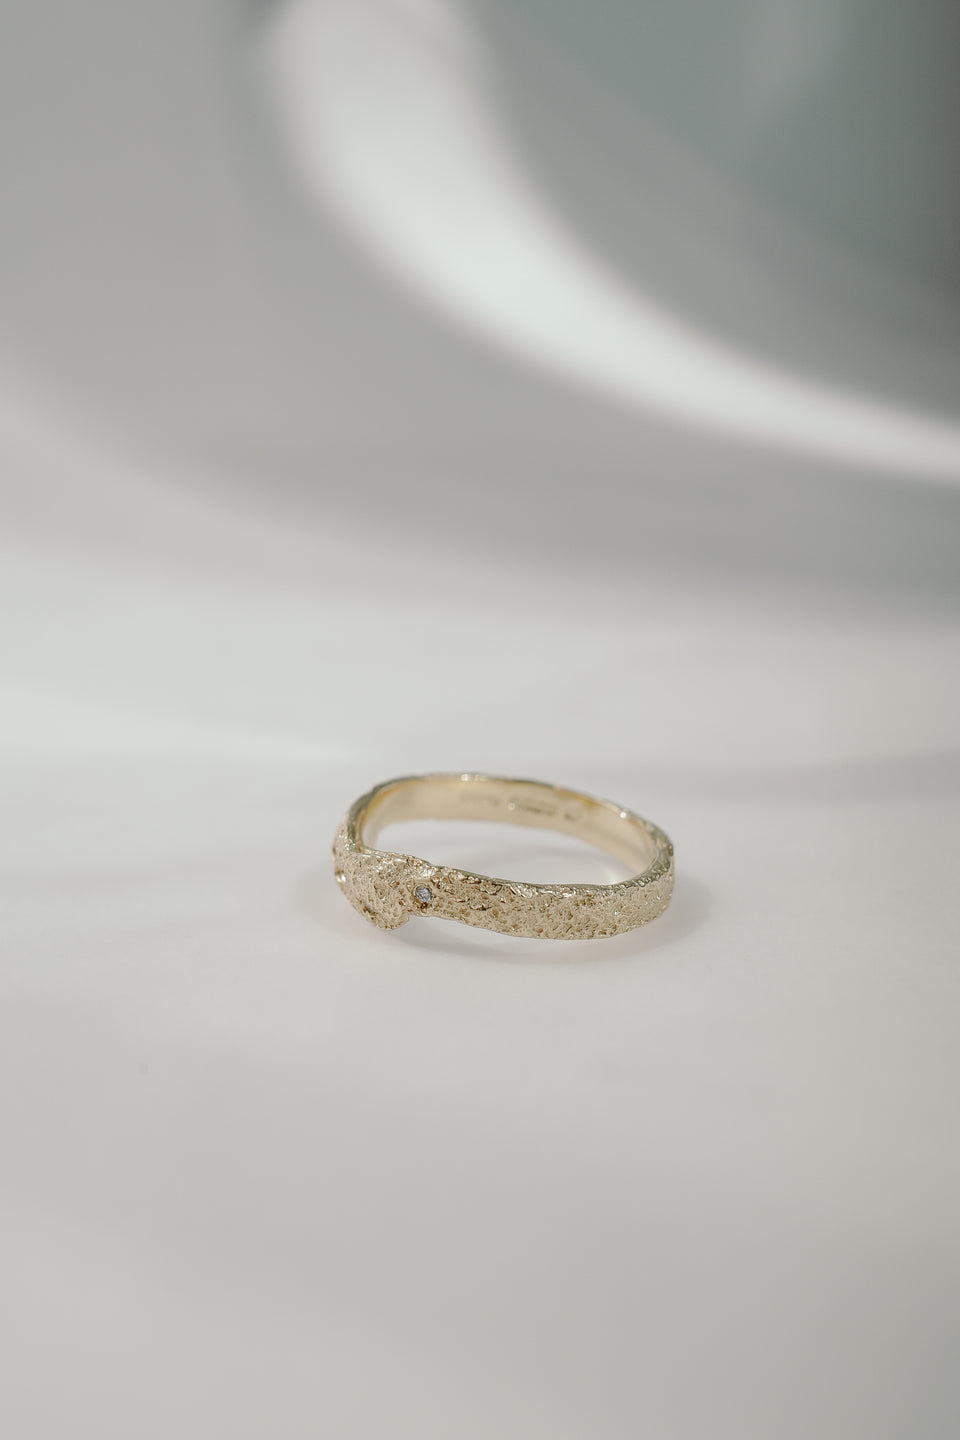 Sandstone Wrap Band in Fairmined Gold with Salt + Pepper Diamonds